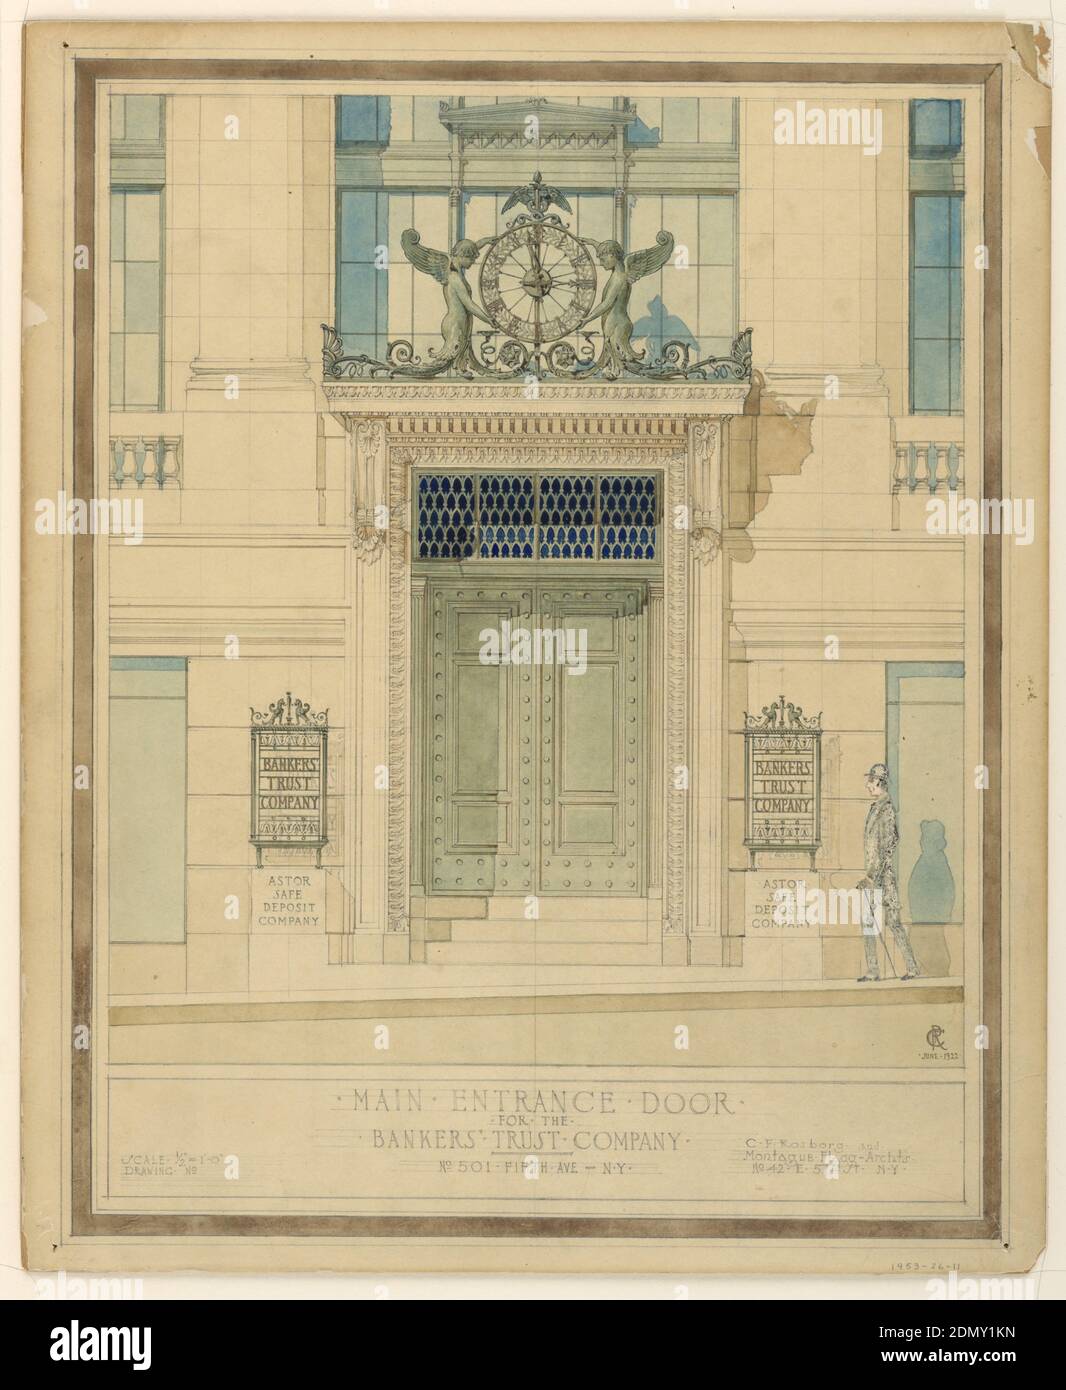 Design for main entrance door for the Bankers' Trust Company, New York, NY, Graphite, brush and watercolor, gold tempera on illustration board, Elevation of design for main entrance to the bank building. A pair of bronze doors surmounted by grille panels, enclosed within a monumental stone frame composed of classical motifs and borders. A projecting entablature above with a clock supported by two winged figures. Lettered, lower center: MAIN-ENTRANCE.DOOR / FOR. THE . / BANKERS’ . TRUST. COMPANY. / No 501-Fifth Ave-N.Y. Inscribed in lower right: C. F. Rosborg. and . / Montague. Flagg. Archts Stock Photo